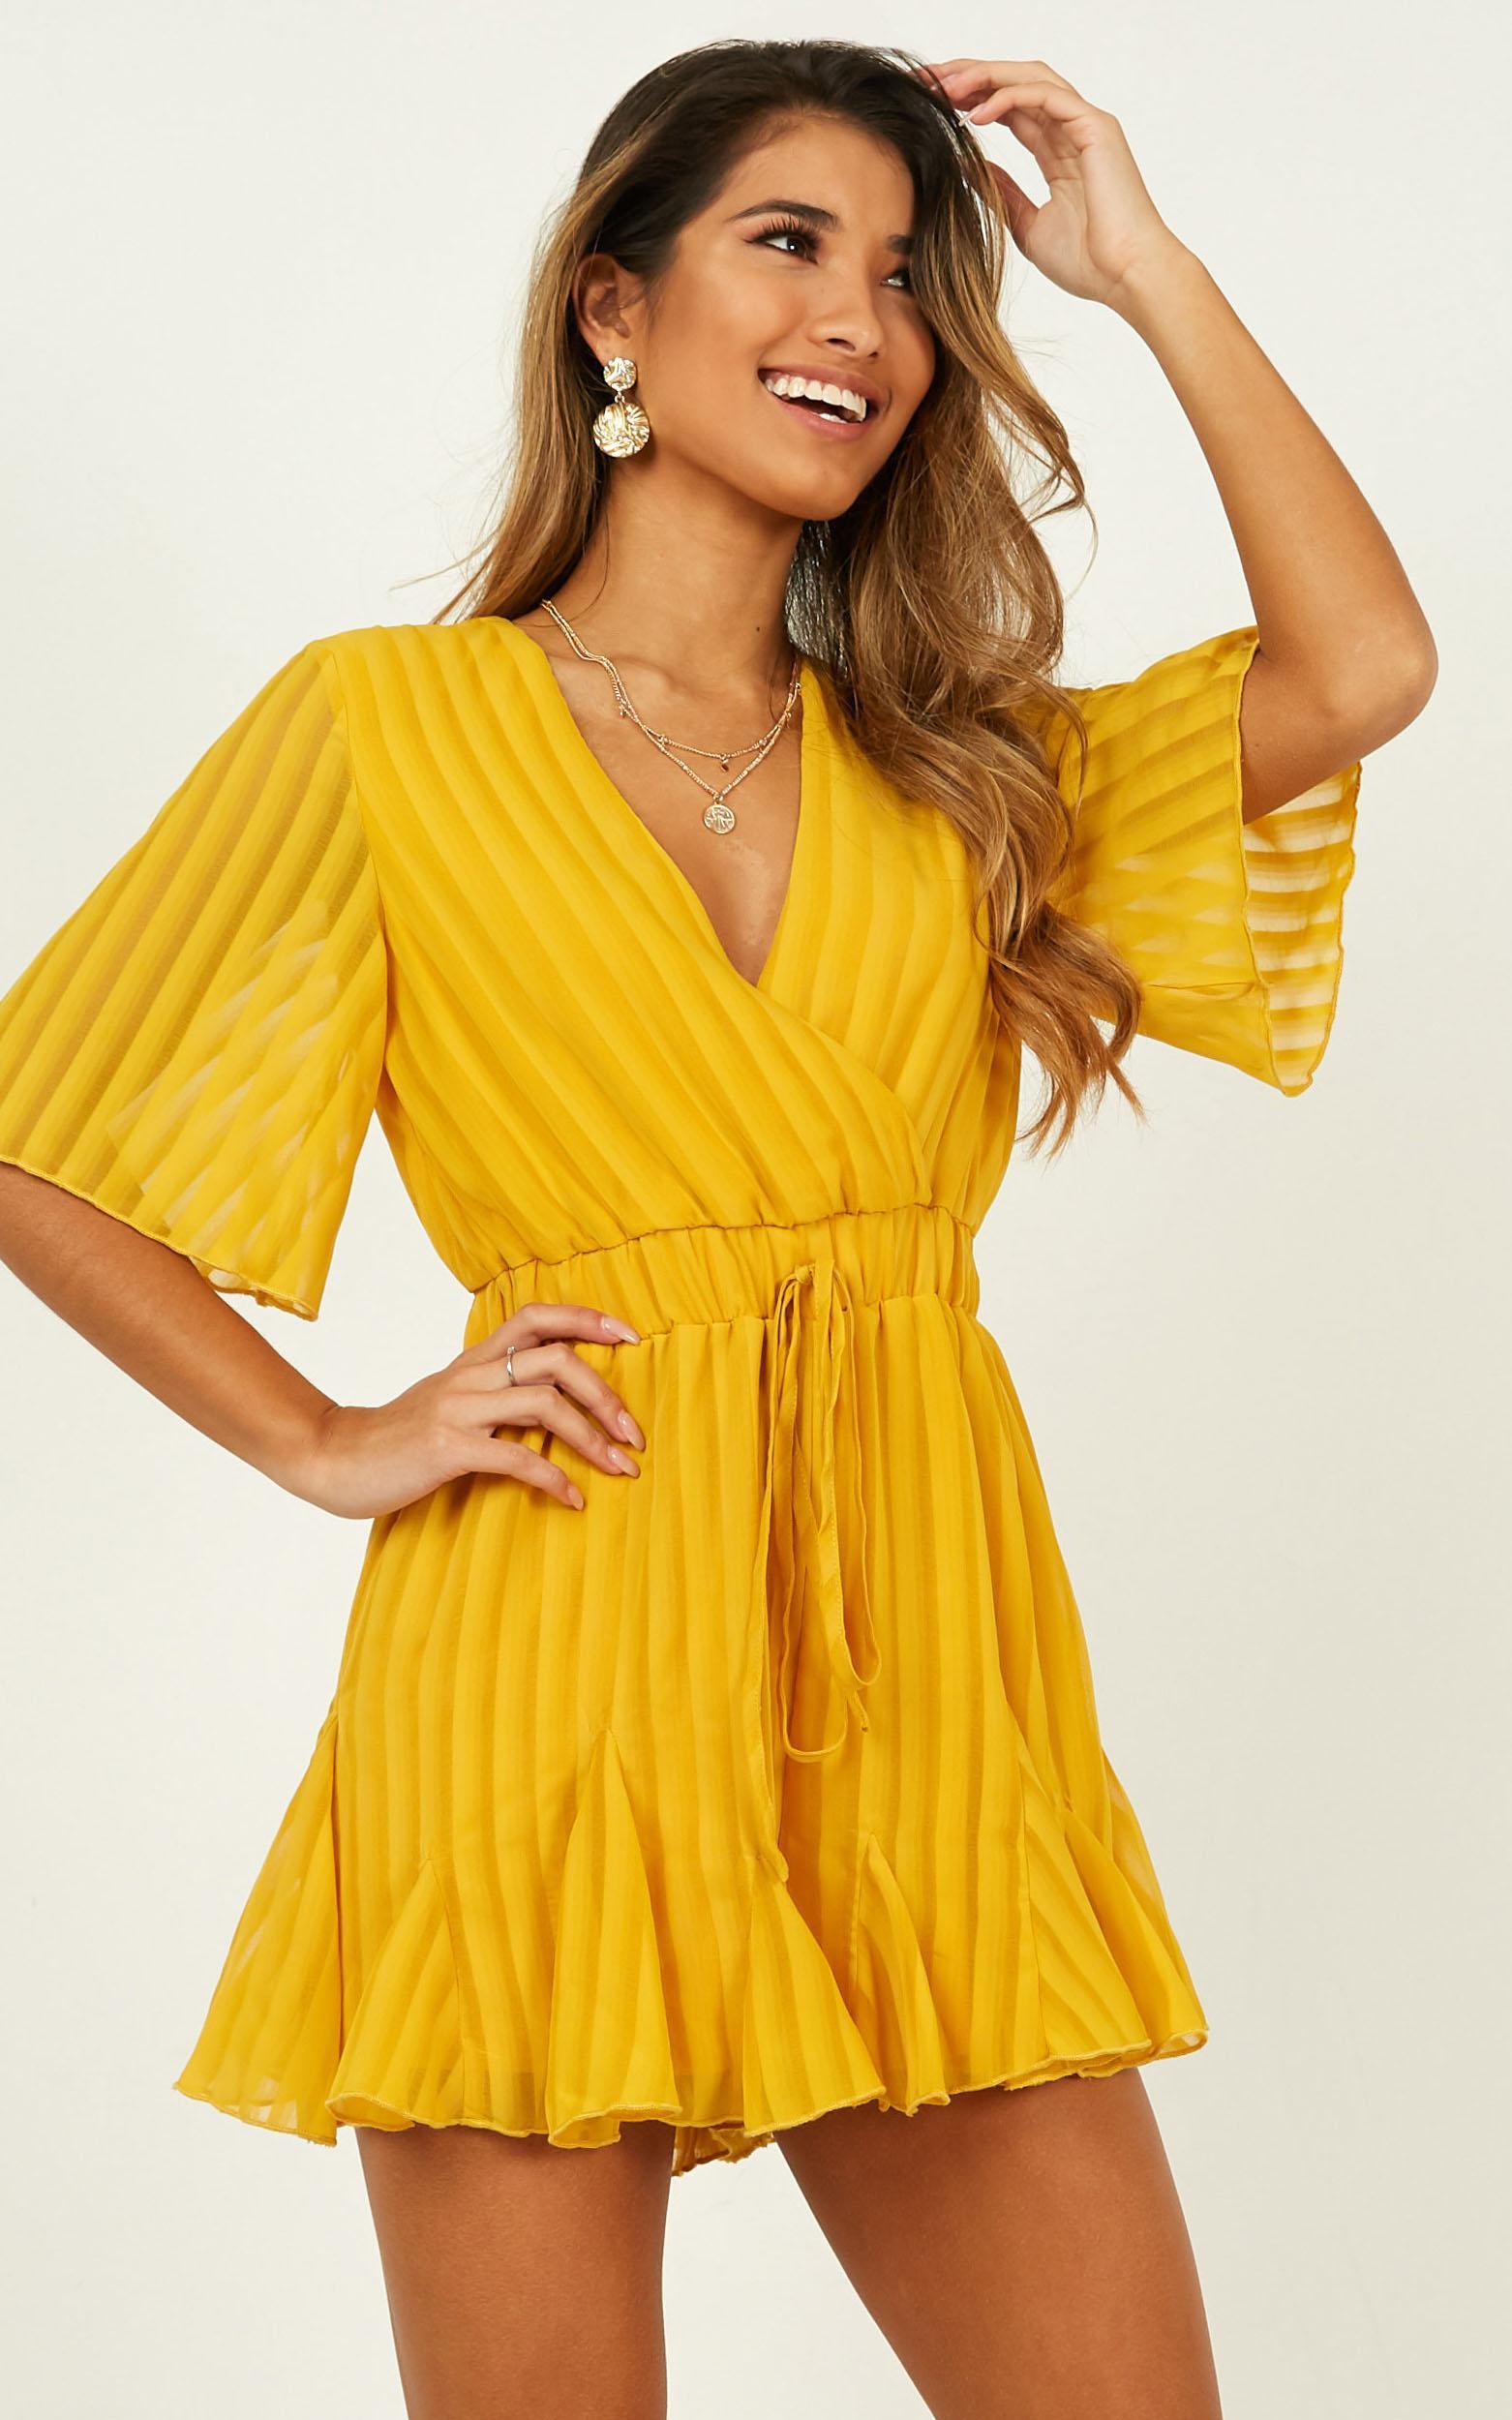 Play On My Heart Playsuit in Mustard - 20, YEL3, hi-res image number null